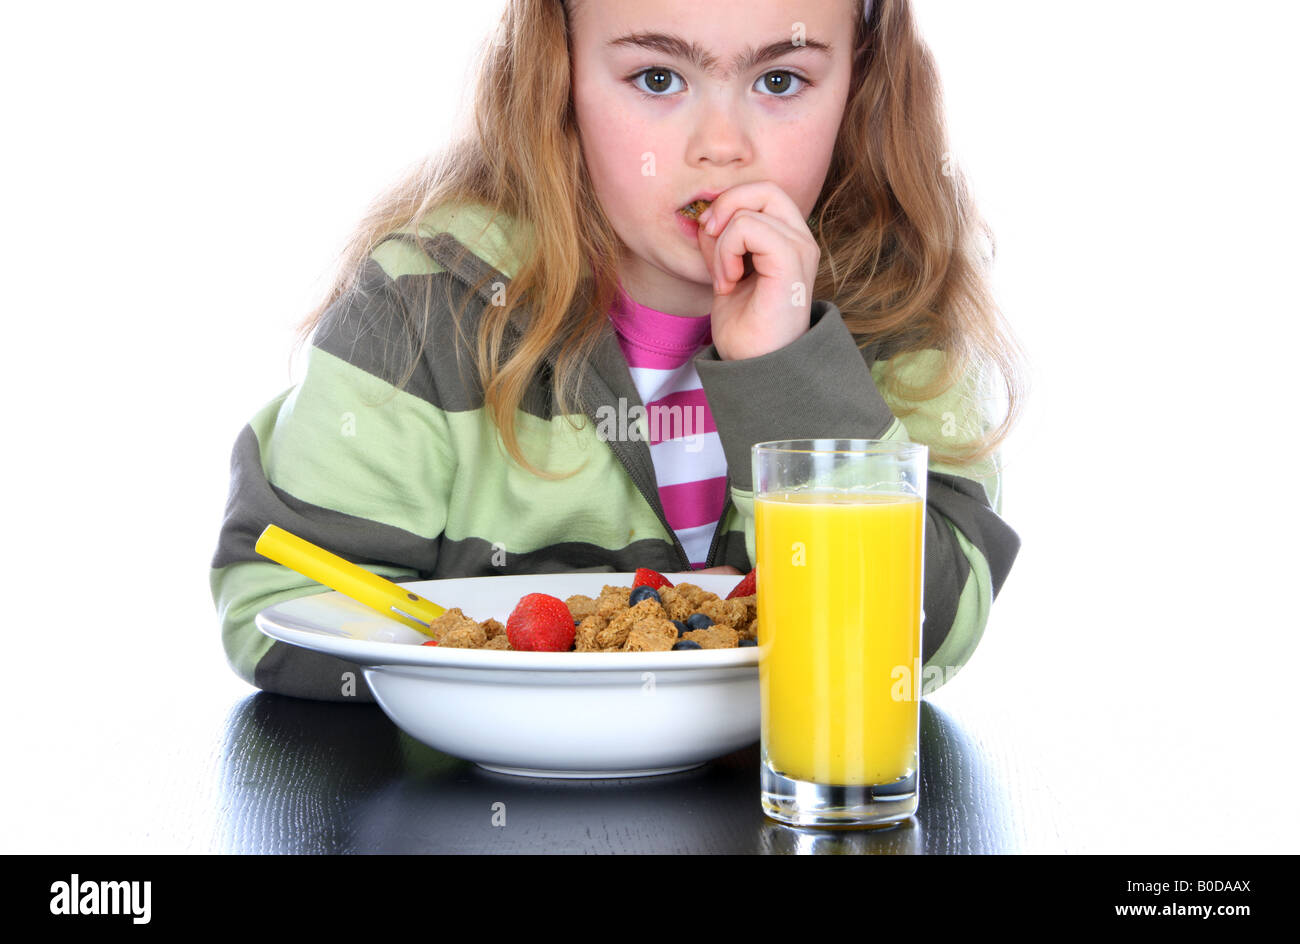 Young Girl Eating Breakfast Models Released Stock Photo